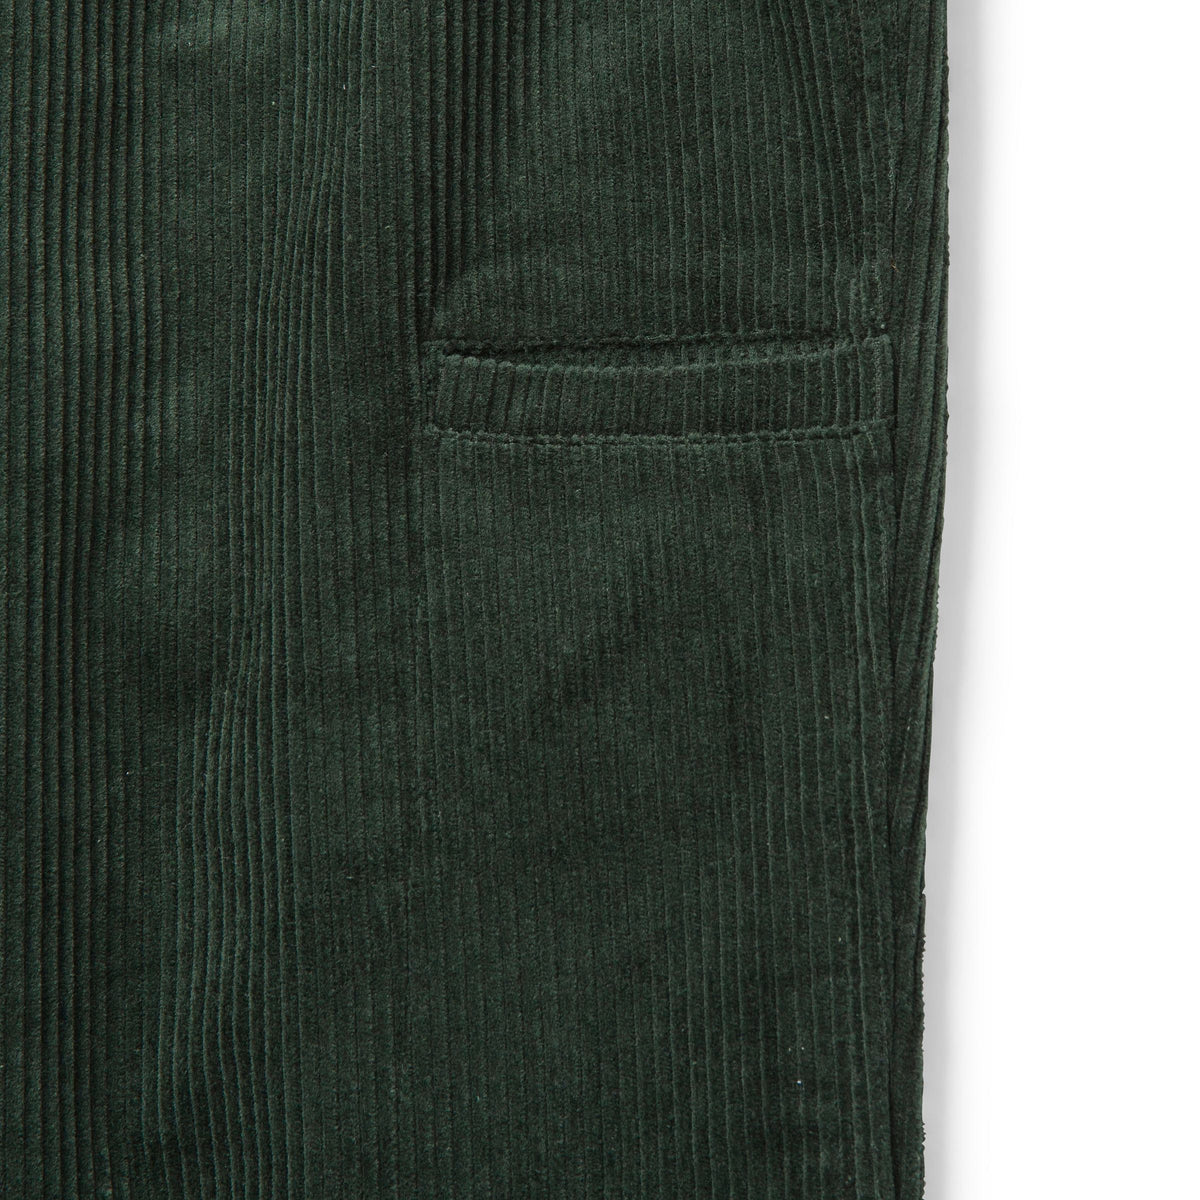 HUF Corduroy Leisure Pants - Forest Green